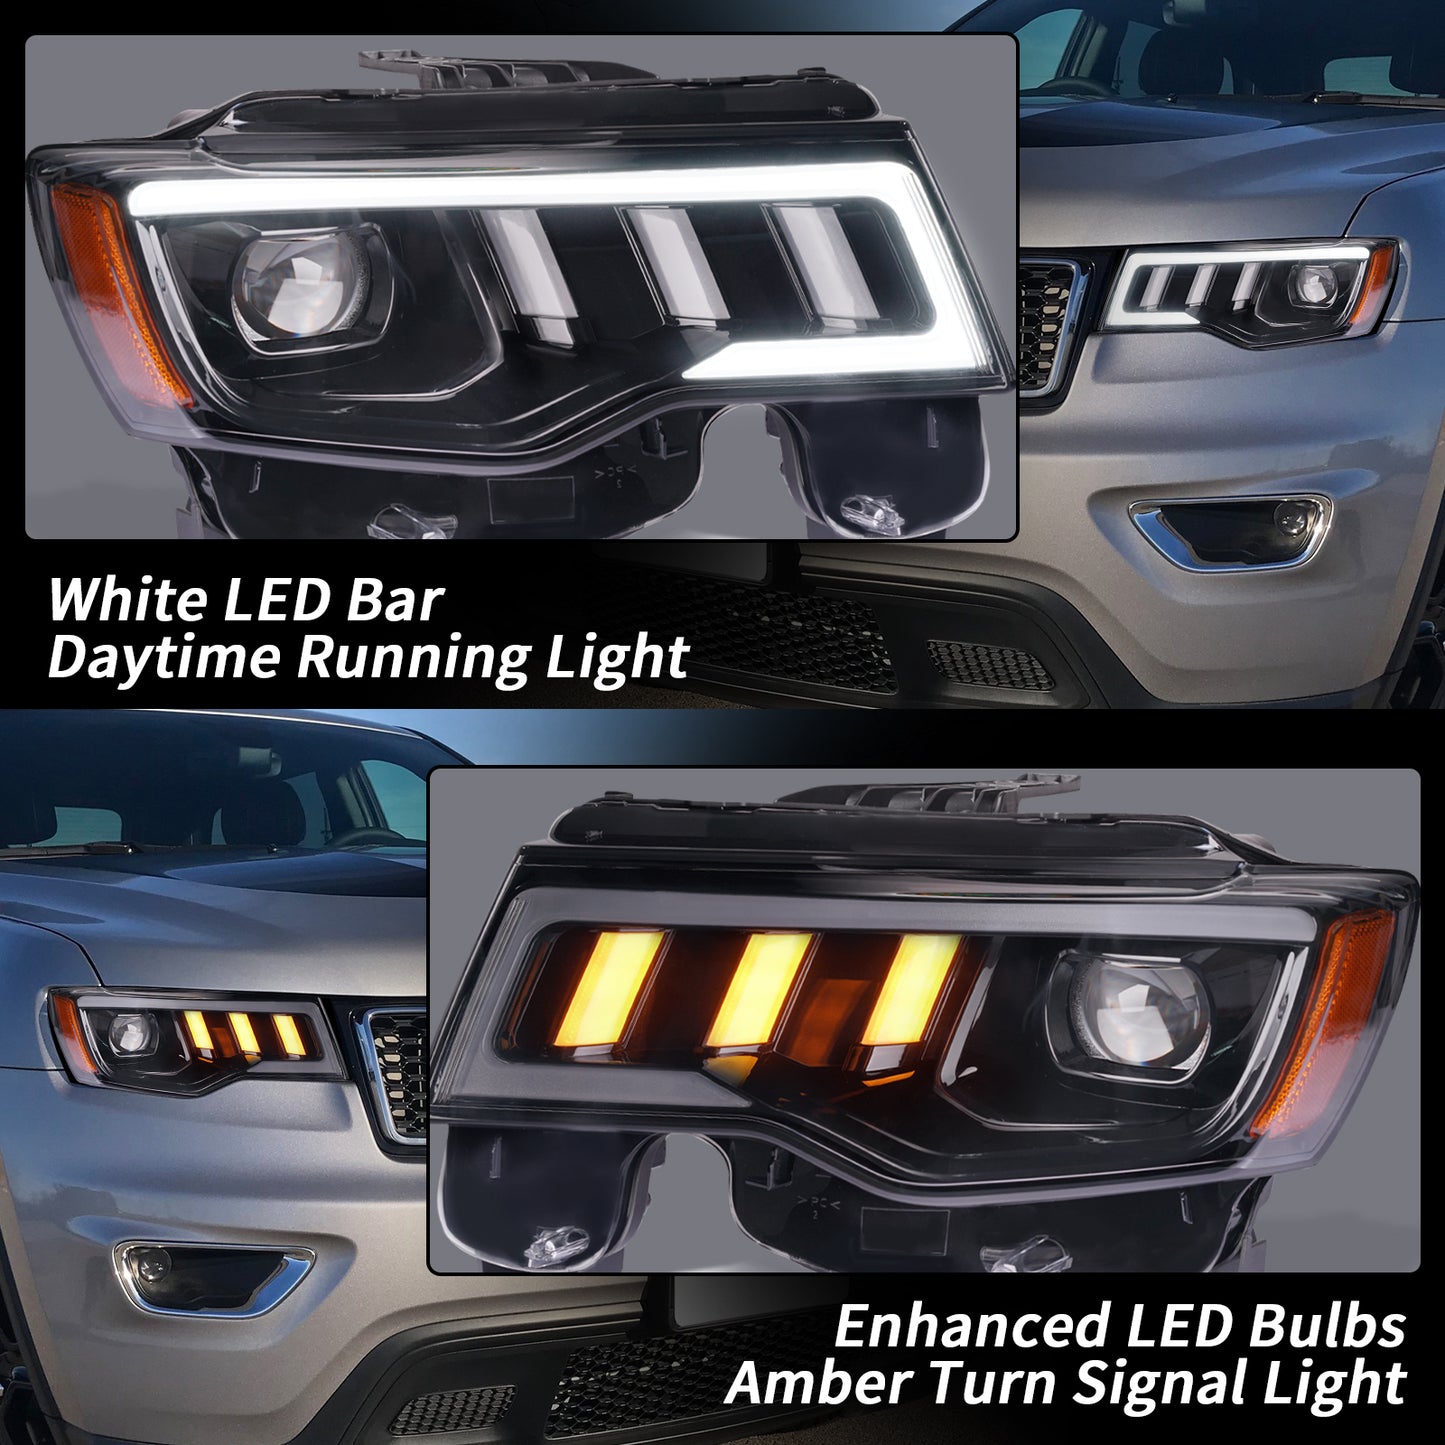 LED Projector Headlights Assembly For Jeep Grand Cherokee 2017-2021